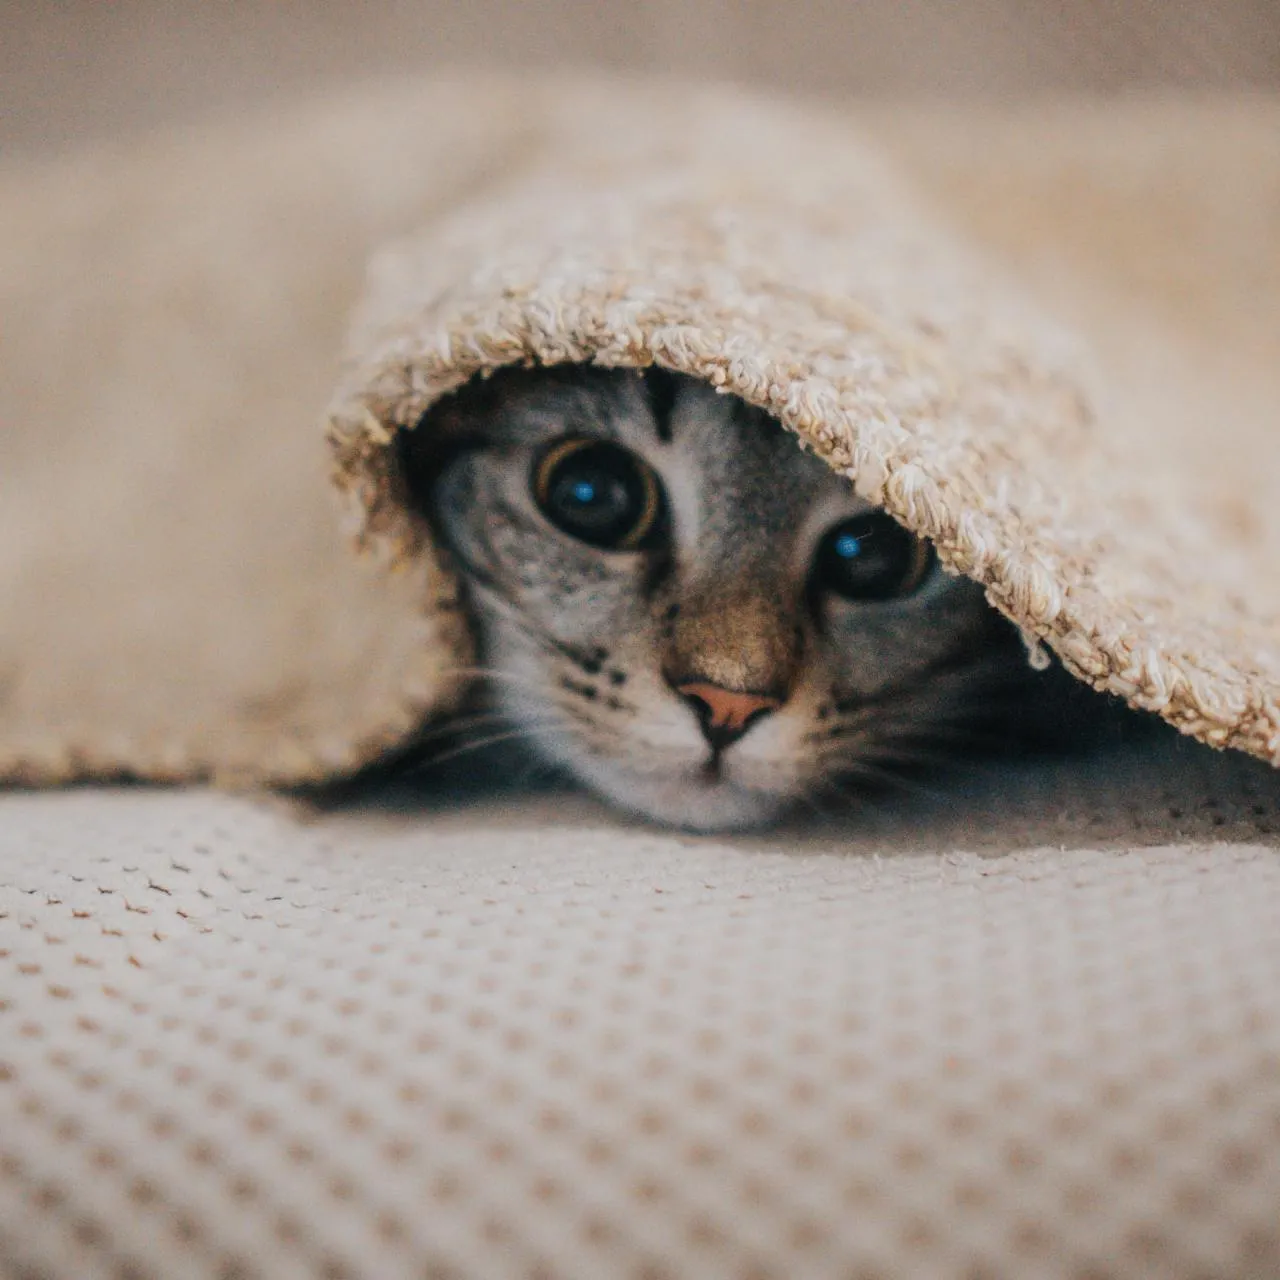 A cat hiding underneath a blanket